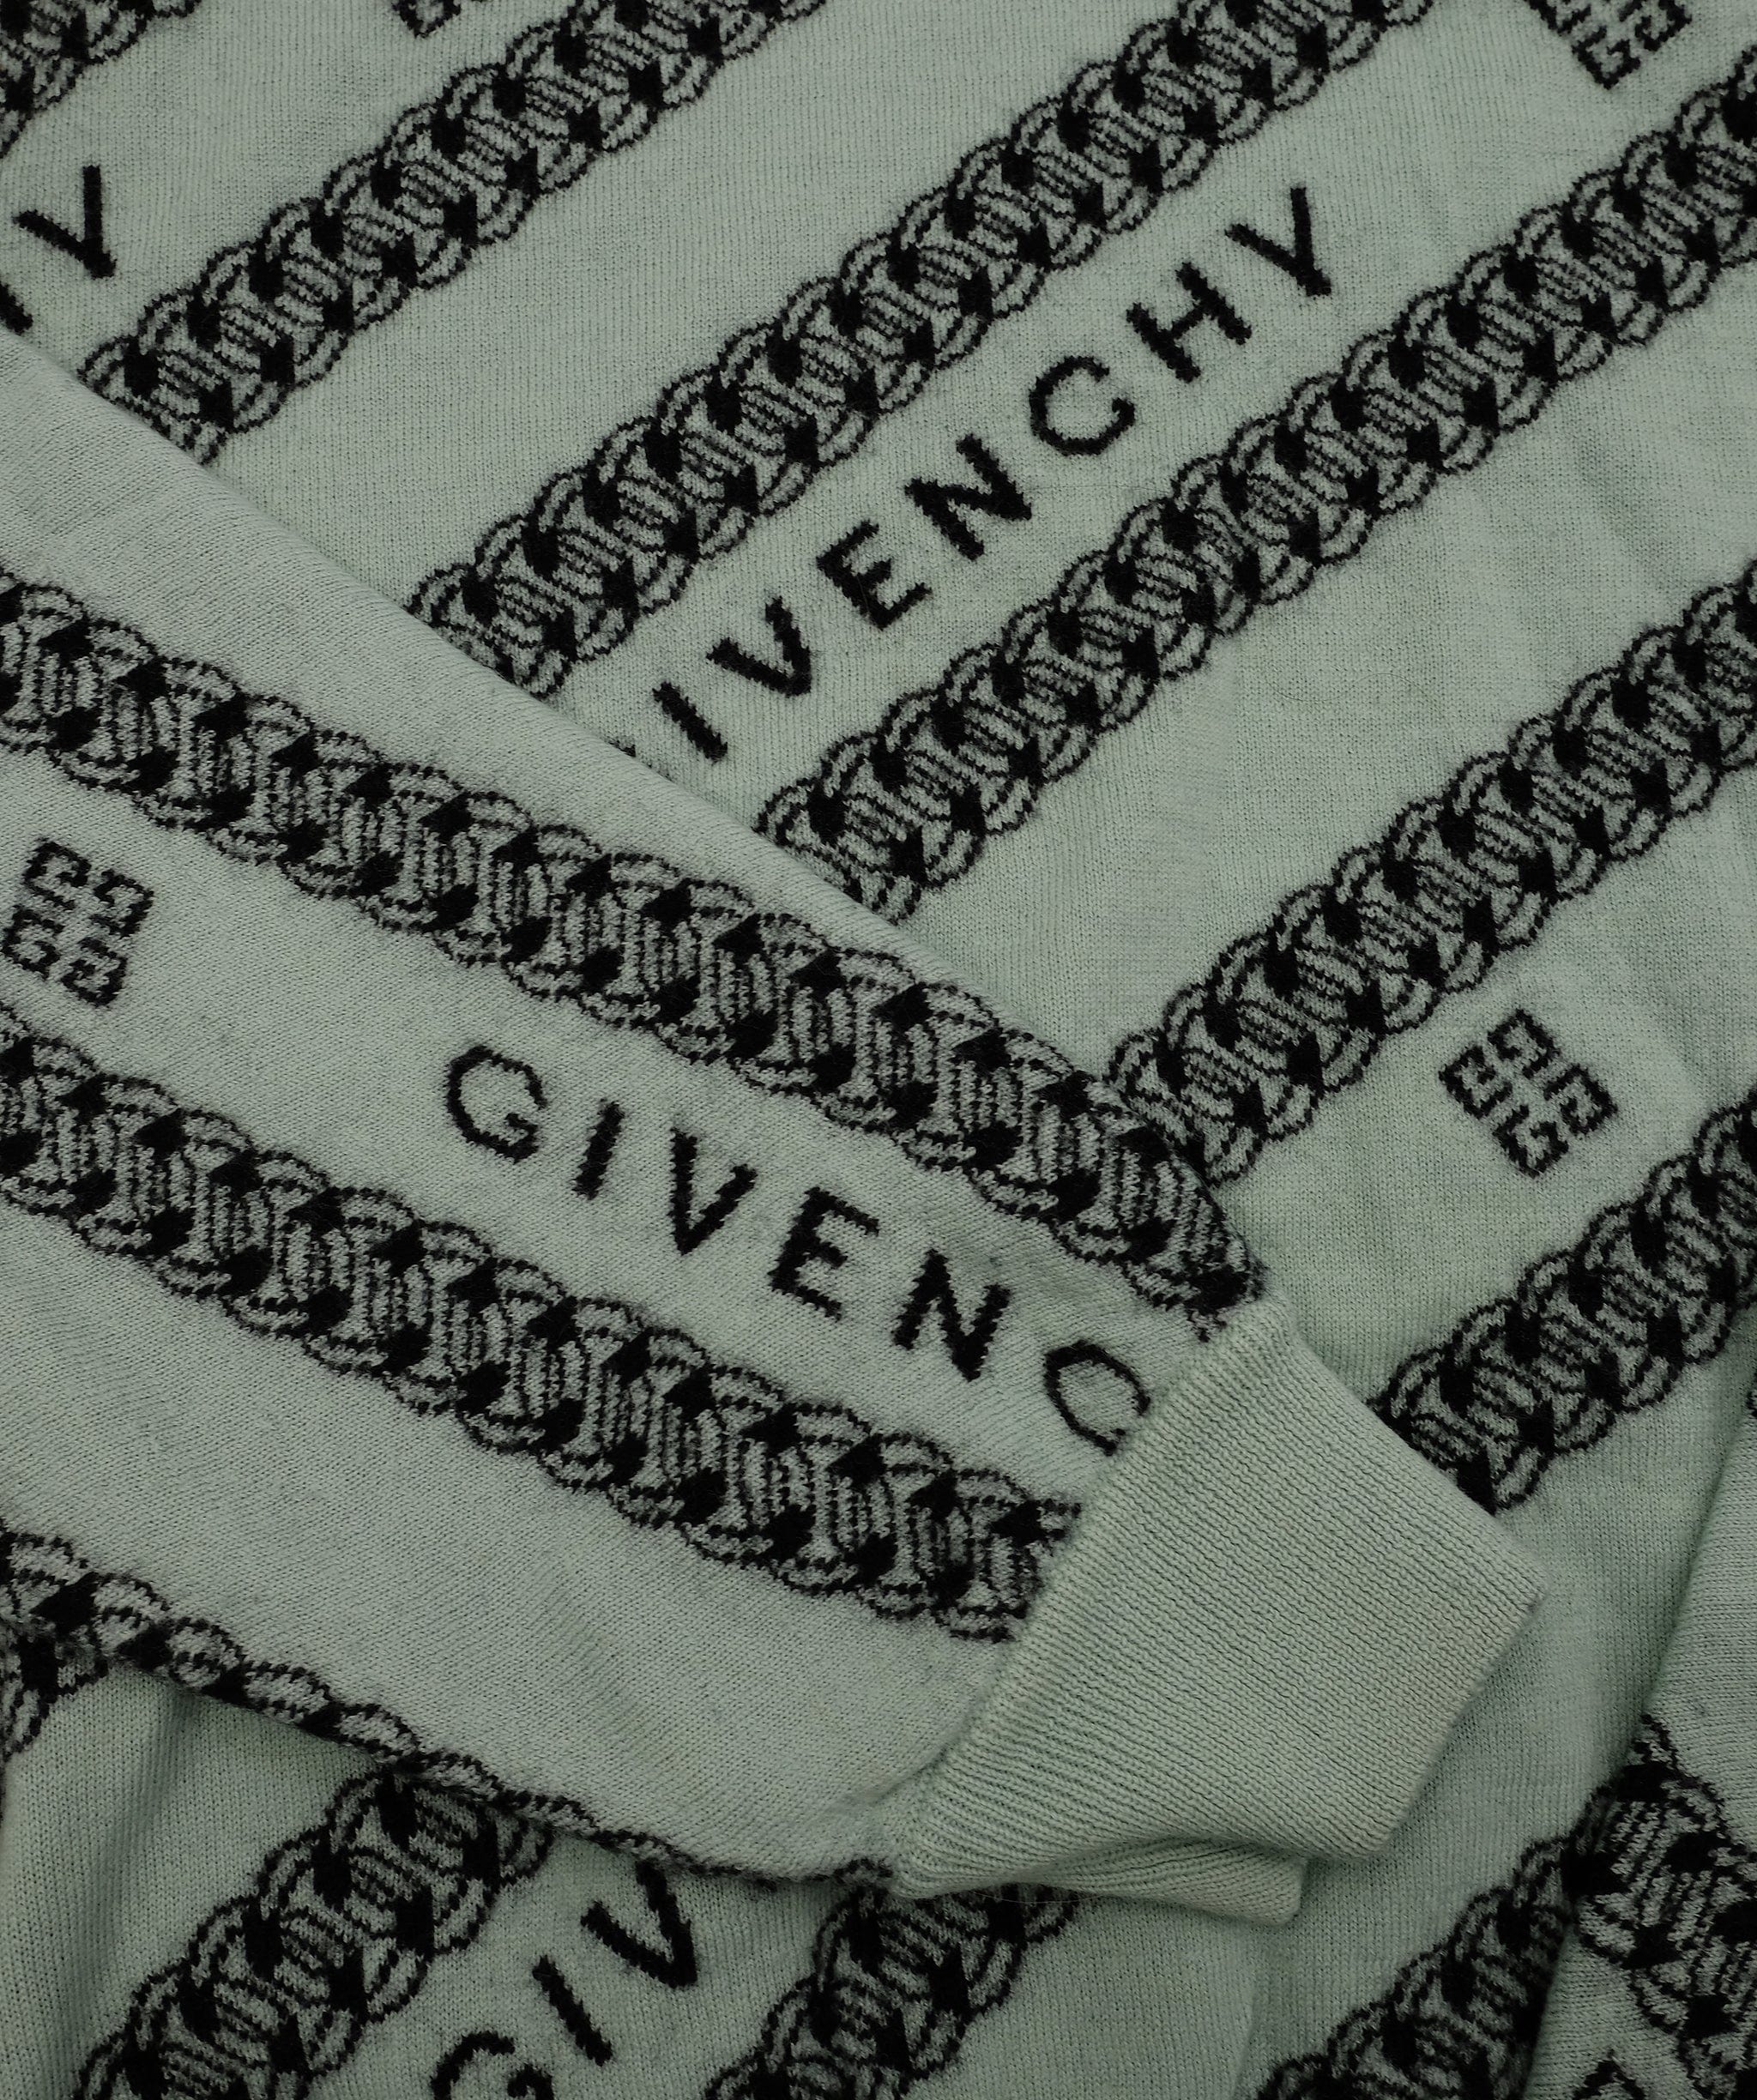 Givenchy Givenchy Green Sweater M RJC1931